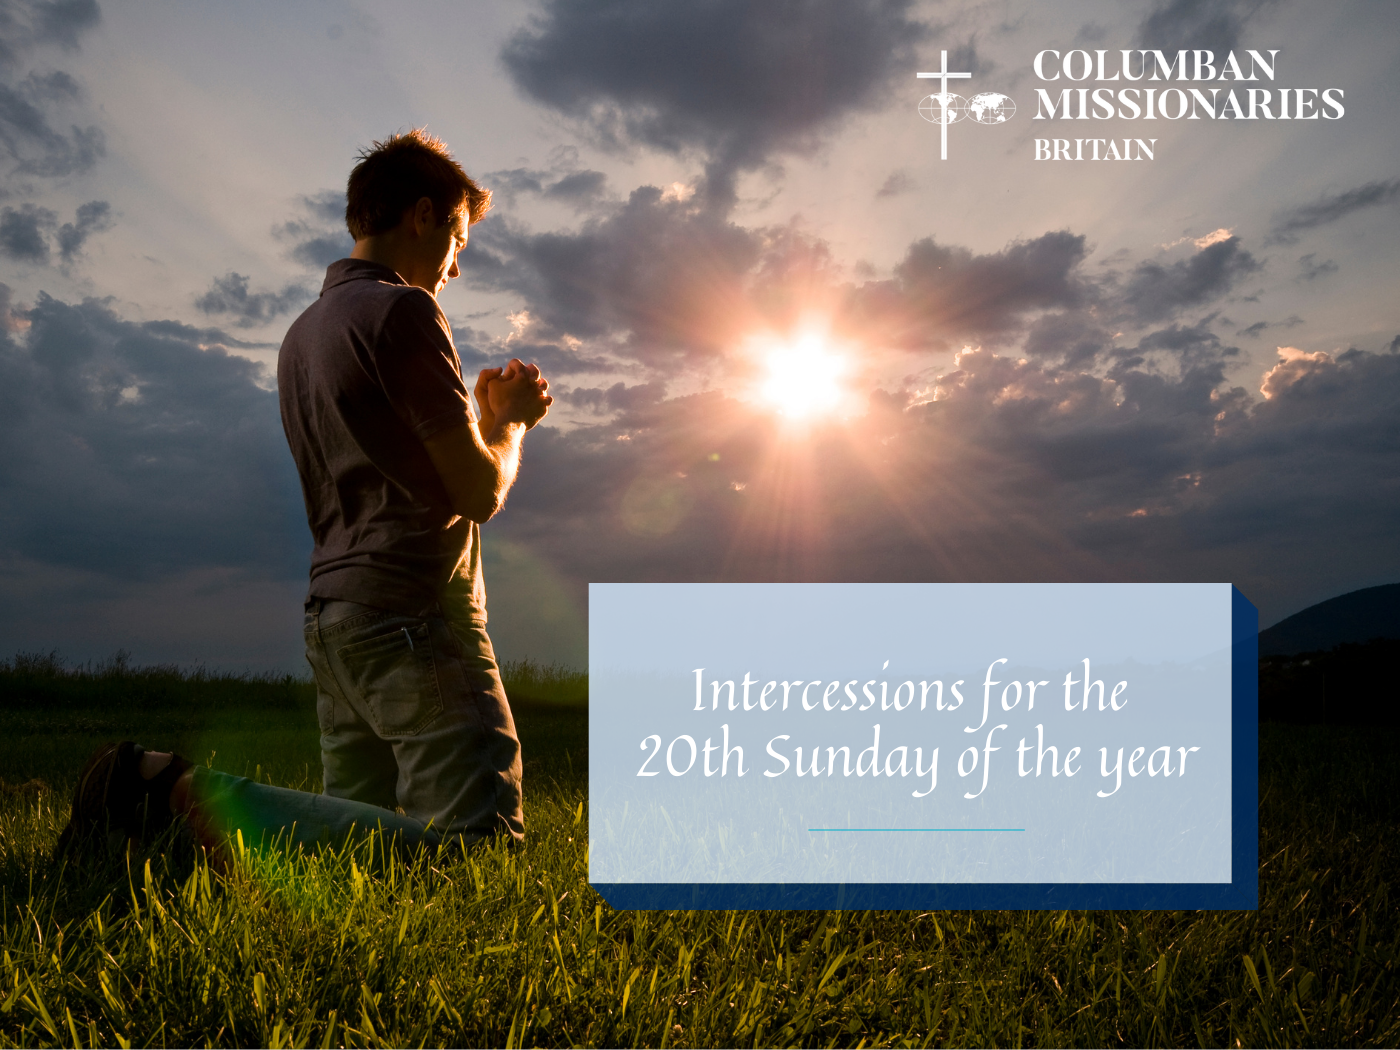 Download prayers of intercession for the 20th Sunday of the year